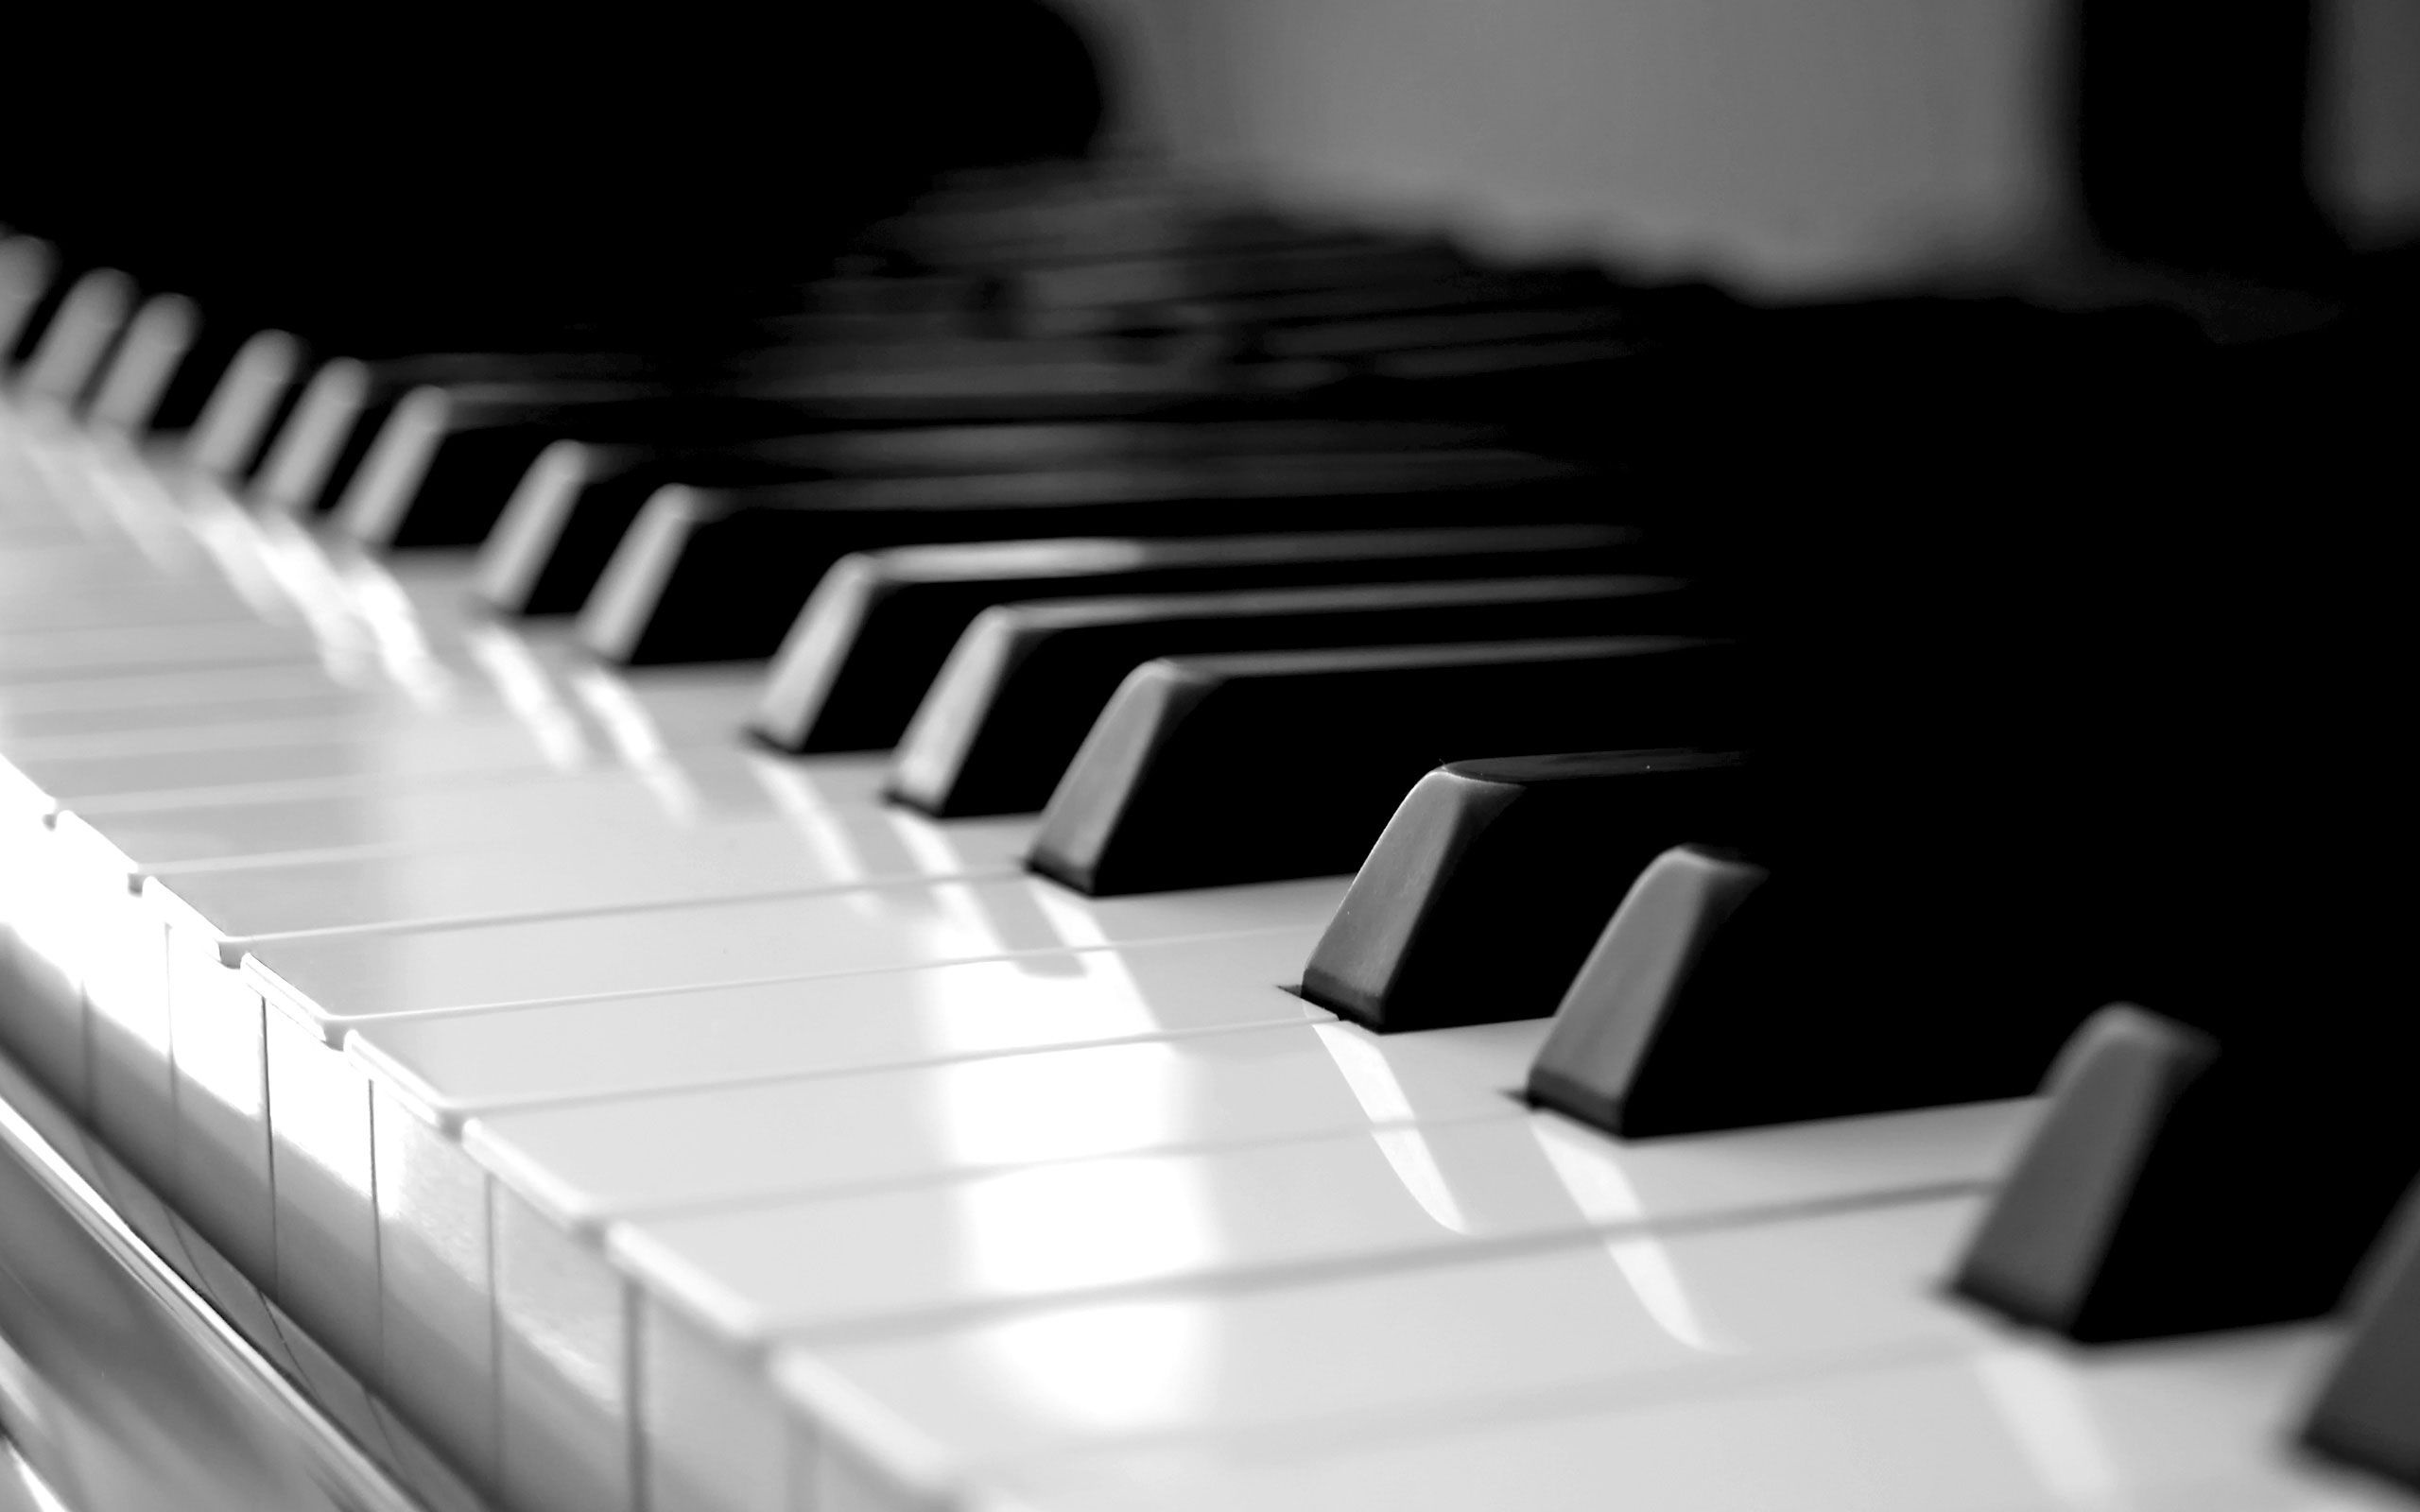 Grand Piano: Keyboard instrument in which the strings, soundboard, and mechanical part are arranged horizontally. 2560x1600 HD Wallpaper.